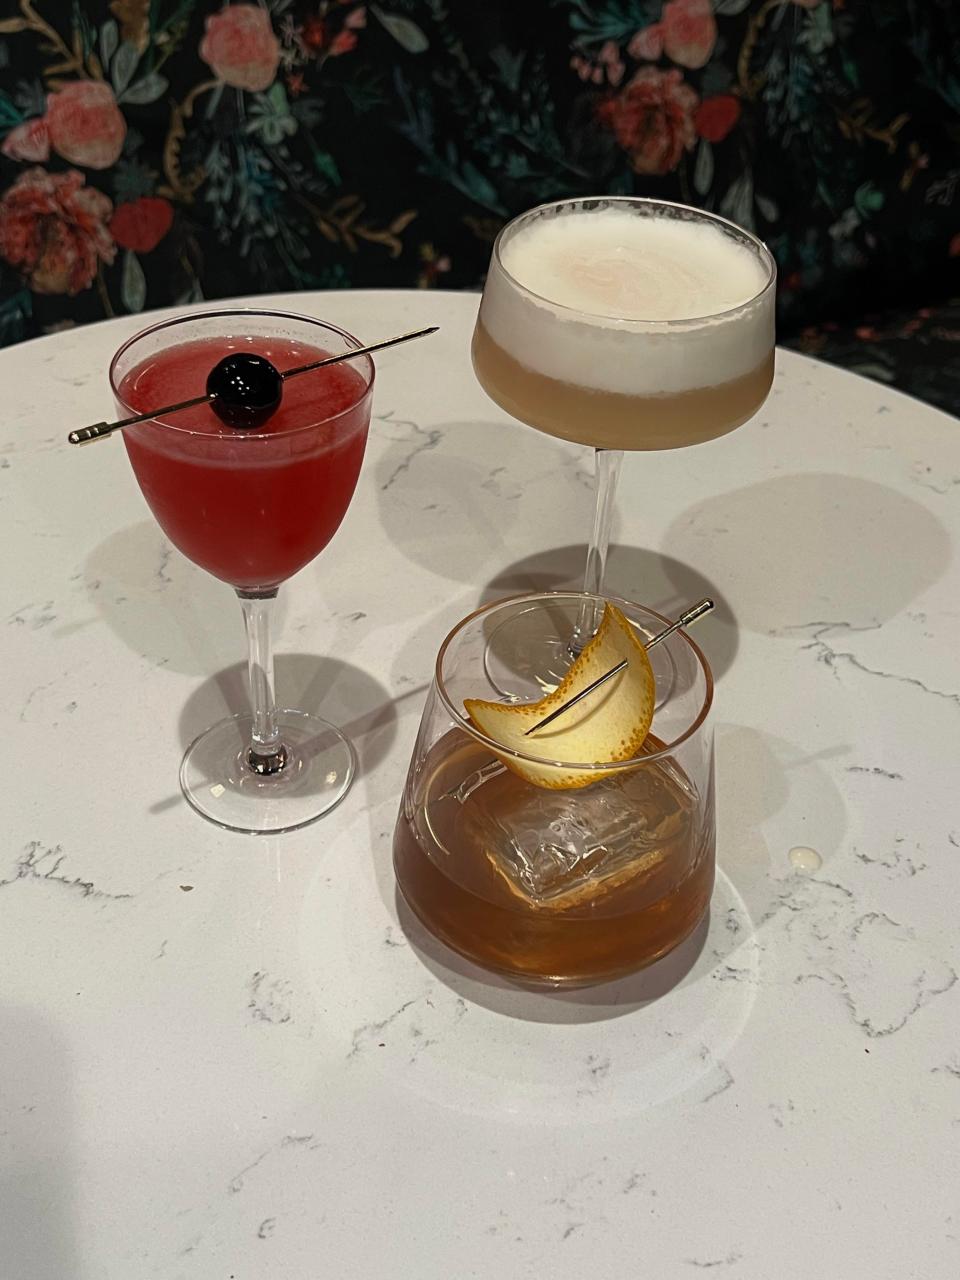 Last Kiss, Banana Pudding Martini and Smokey Chocolate Old Fashioned are the Valentine's-inspired cocktails you'll find at Daddy Tom's in Bristol Borough.